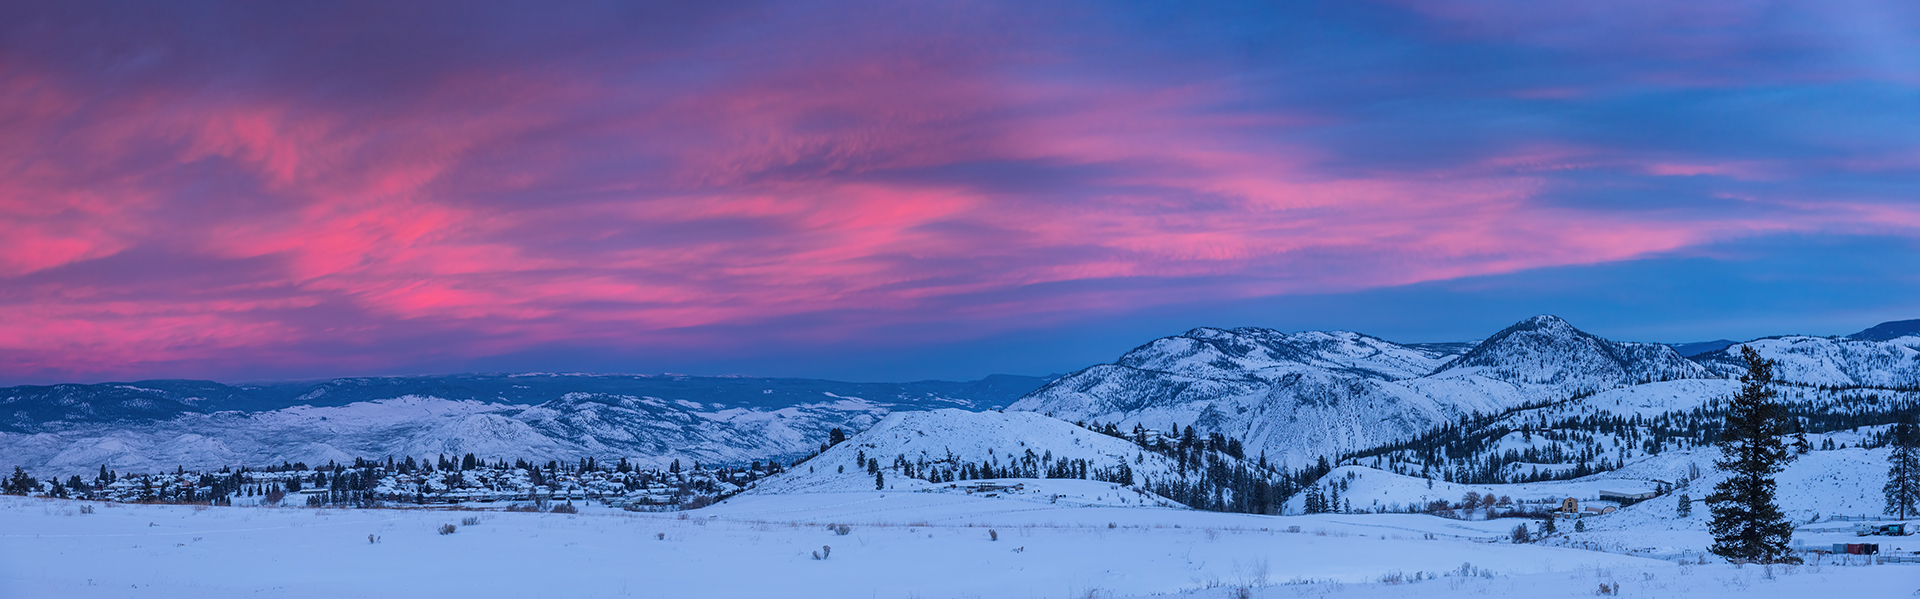 panoramic view of a blue and pink sky with snow